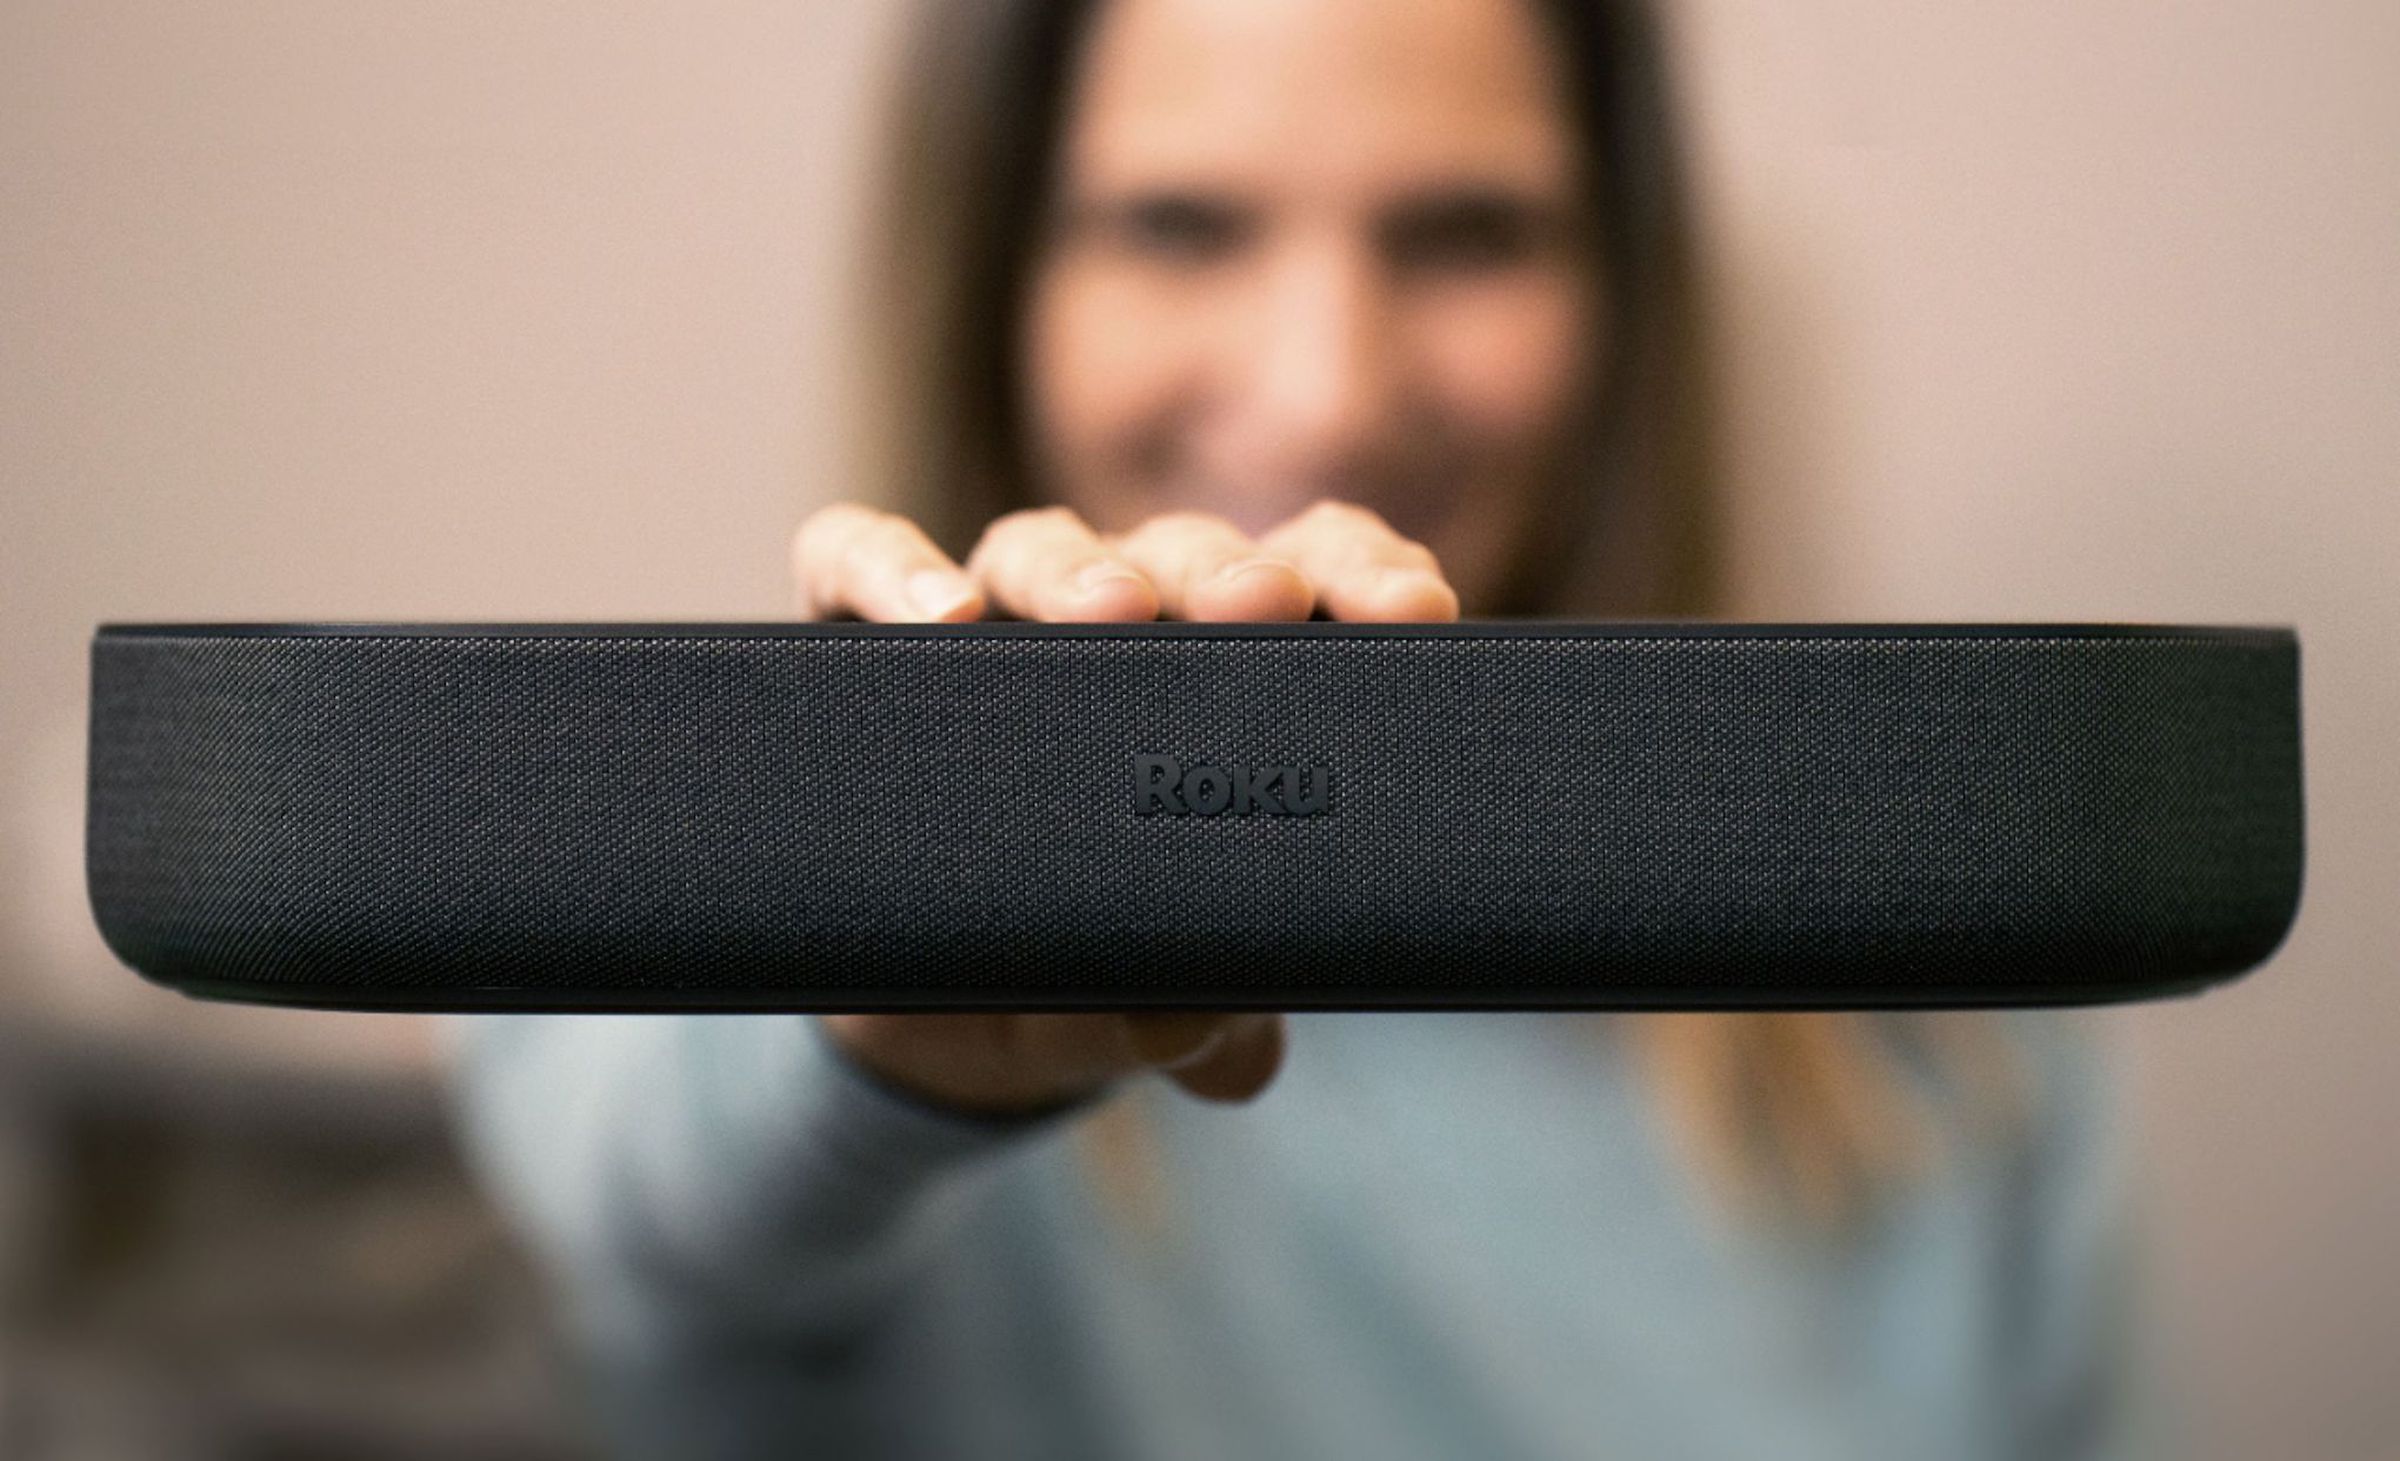 Roku’s Streambar is a two-in-one soundbar that doubles as a streaming player.